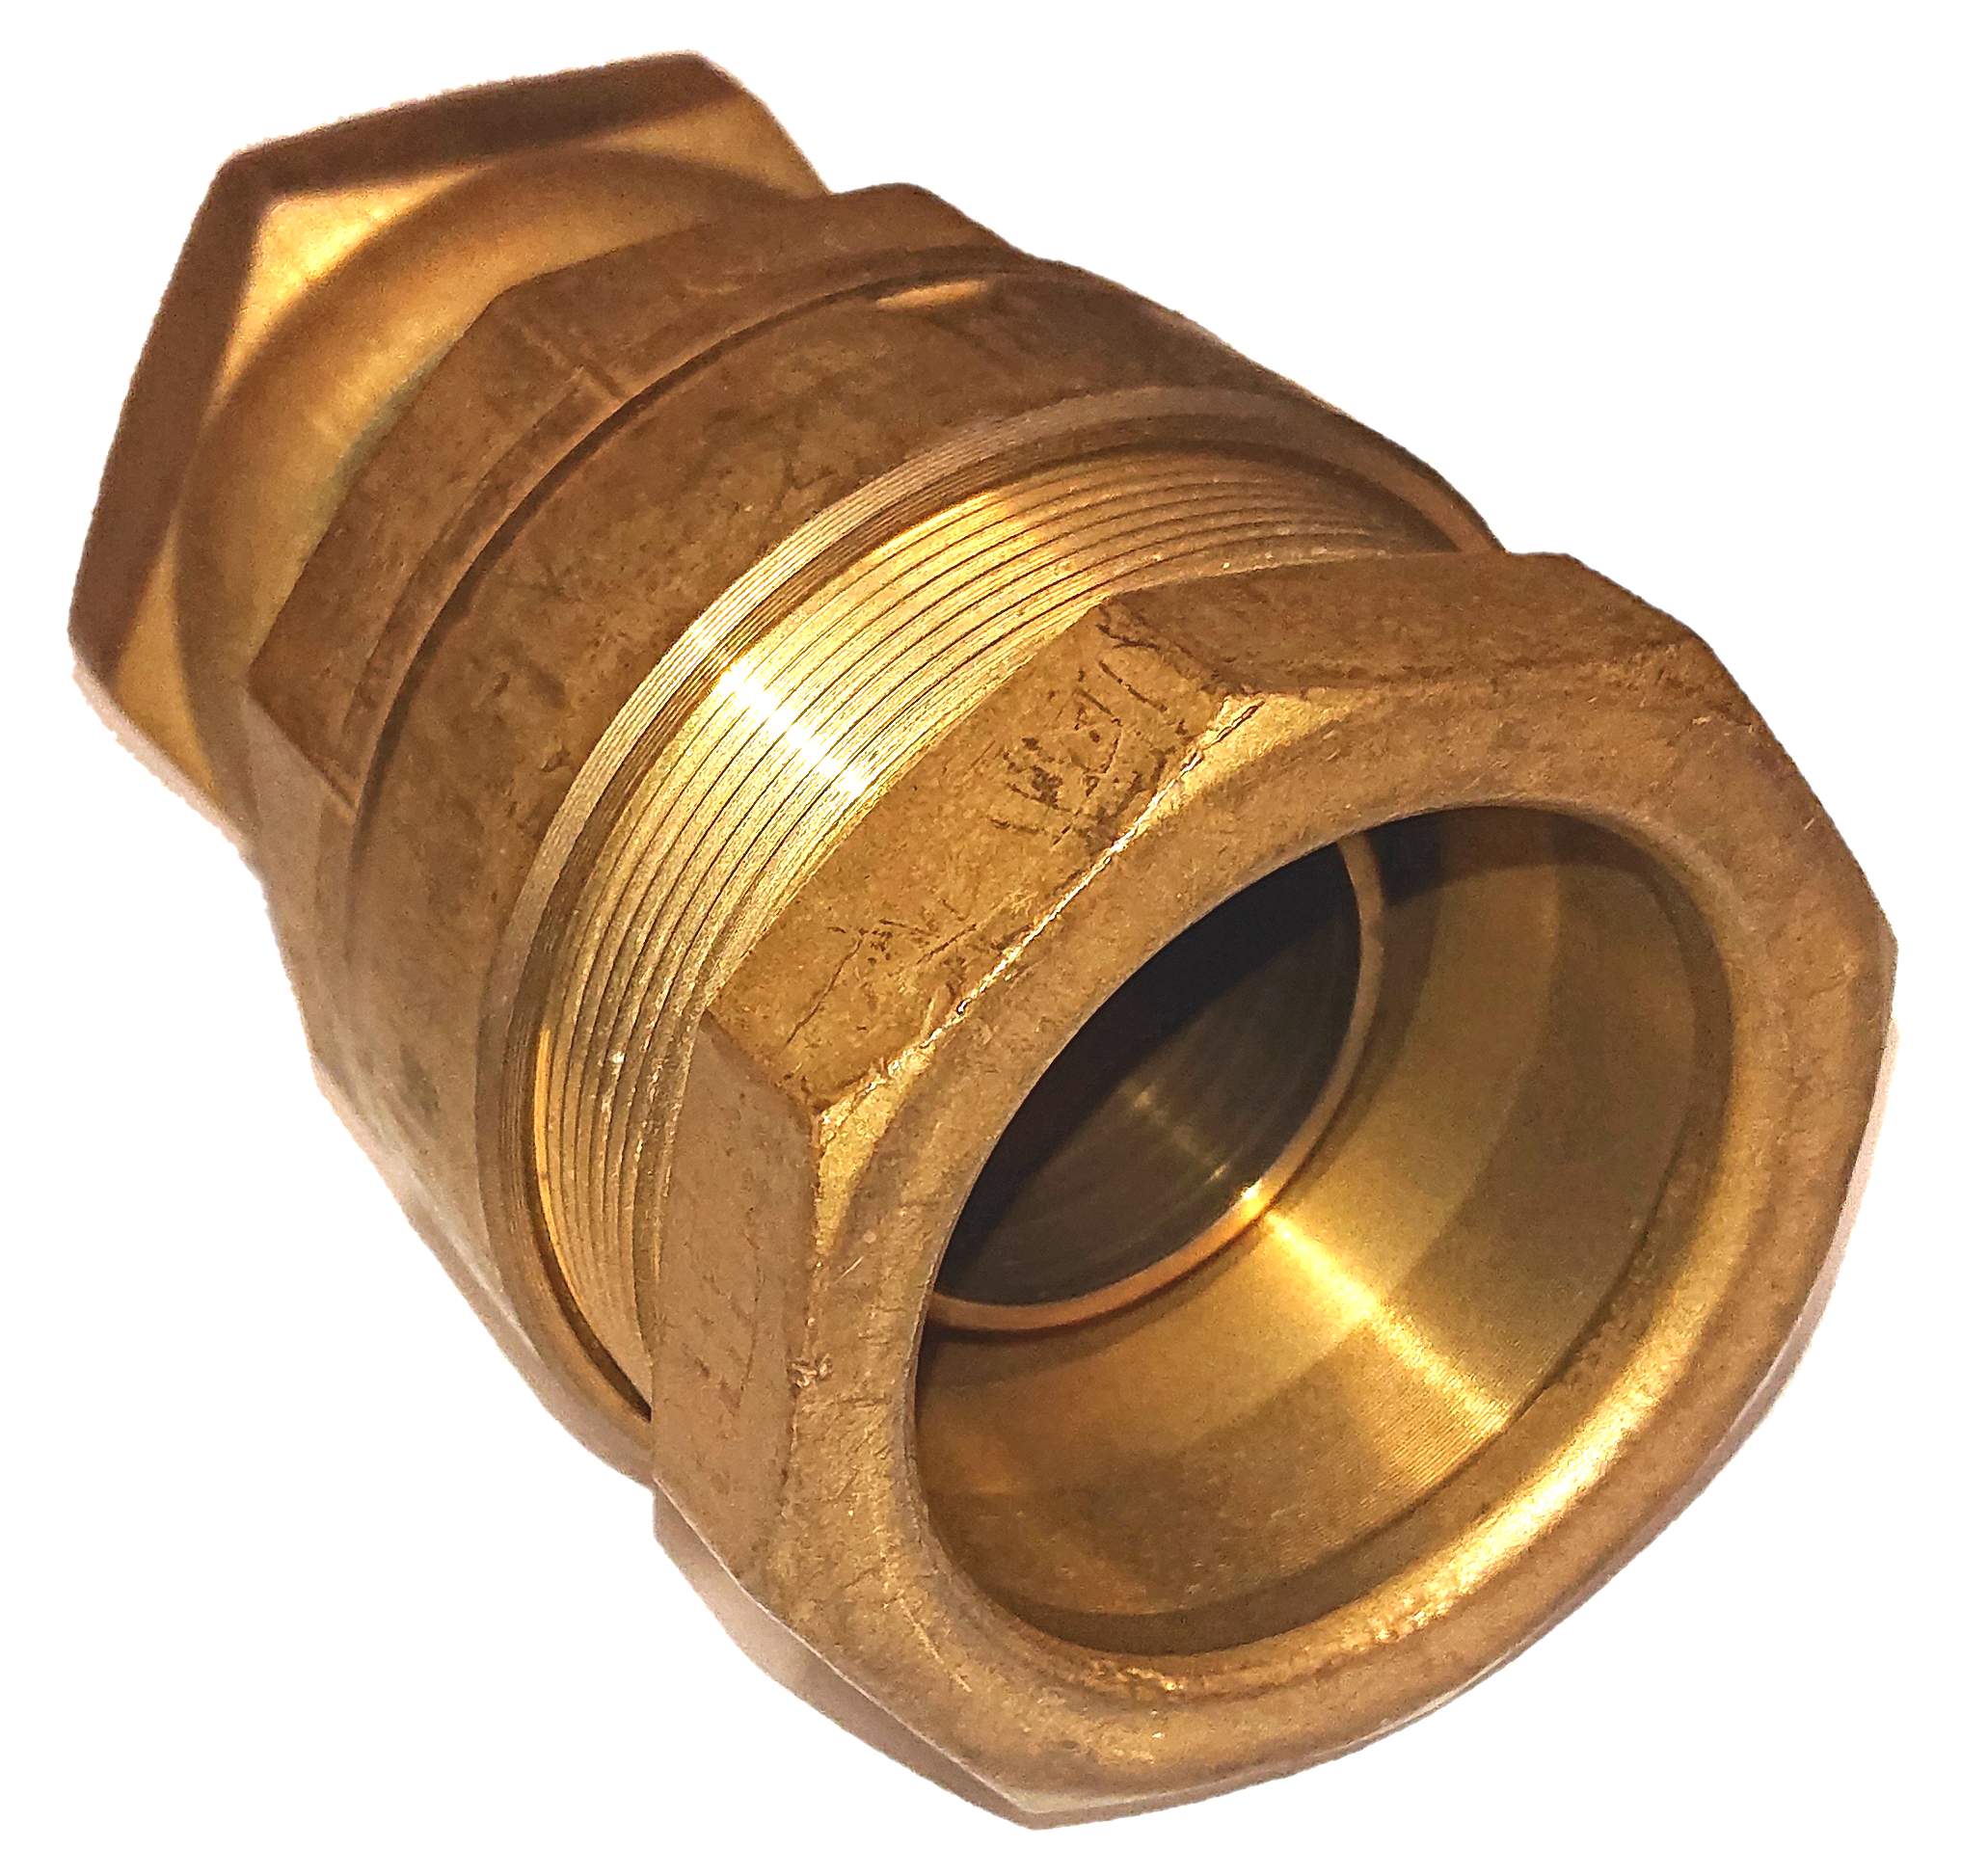 PE 40 gas fitting with sphero-conical joint and 33x42 nut